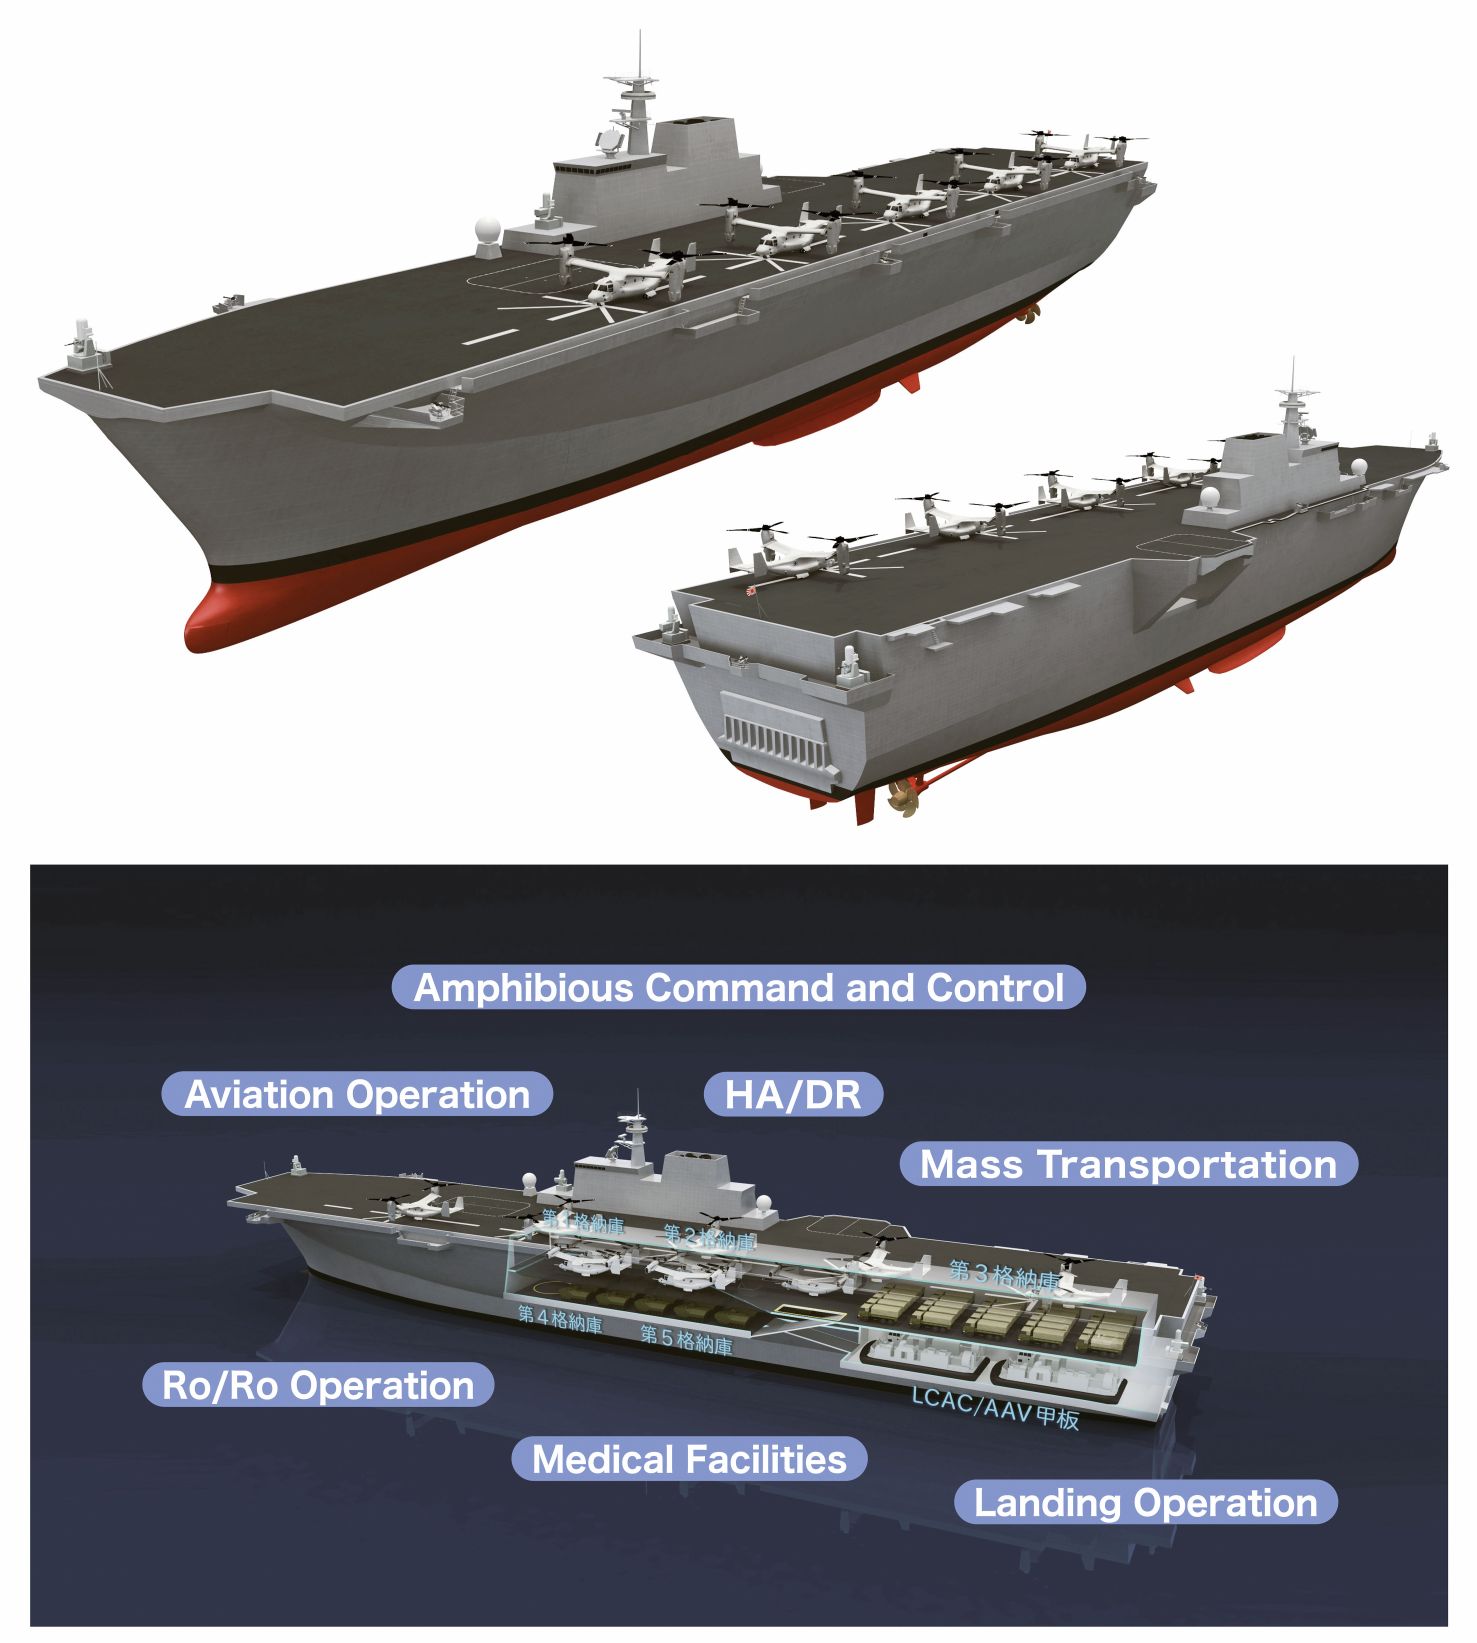 JMU unveiled at DSEI Japan 2019 the preliminary design of an LHD amphibious assault ship it plans to propose to the JMSDF. (JMU)